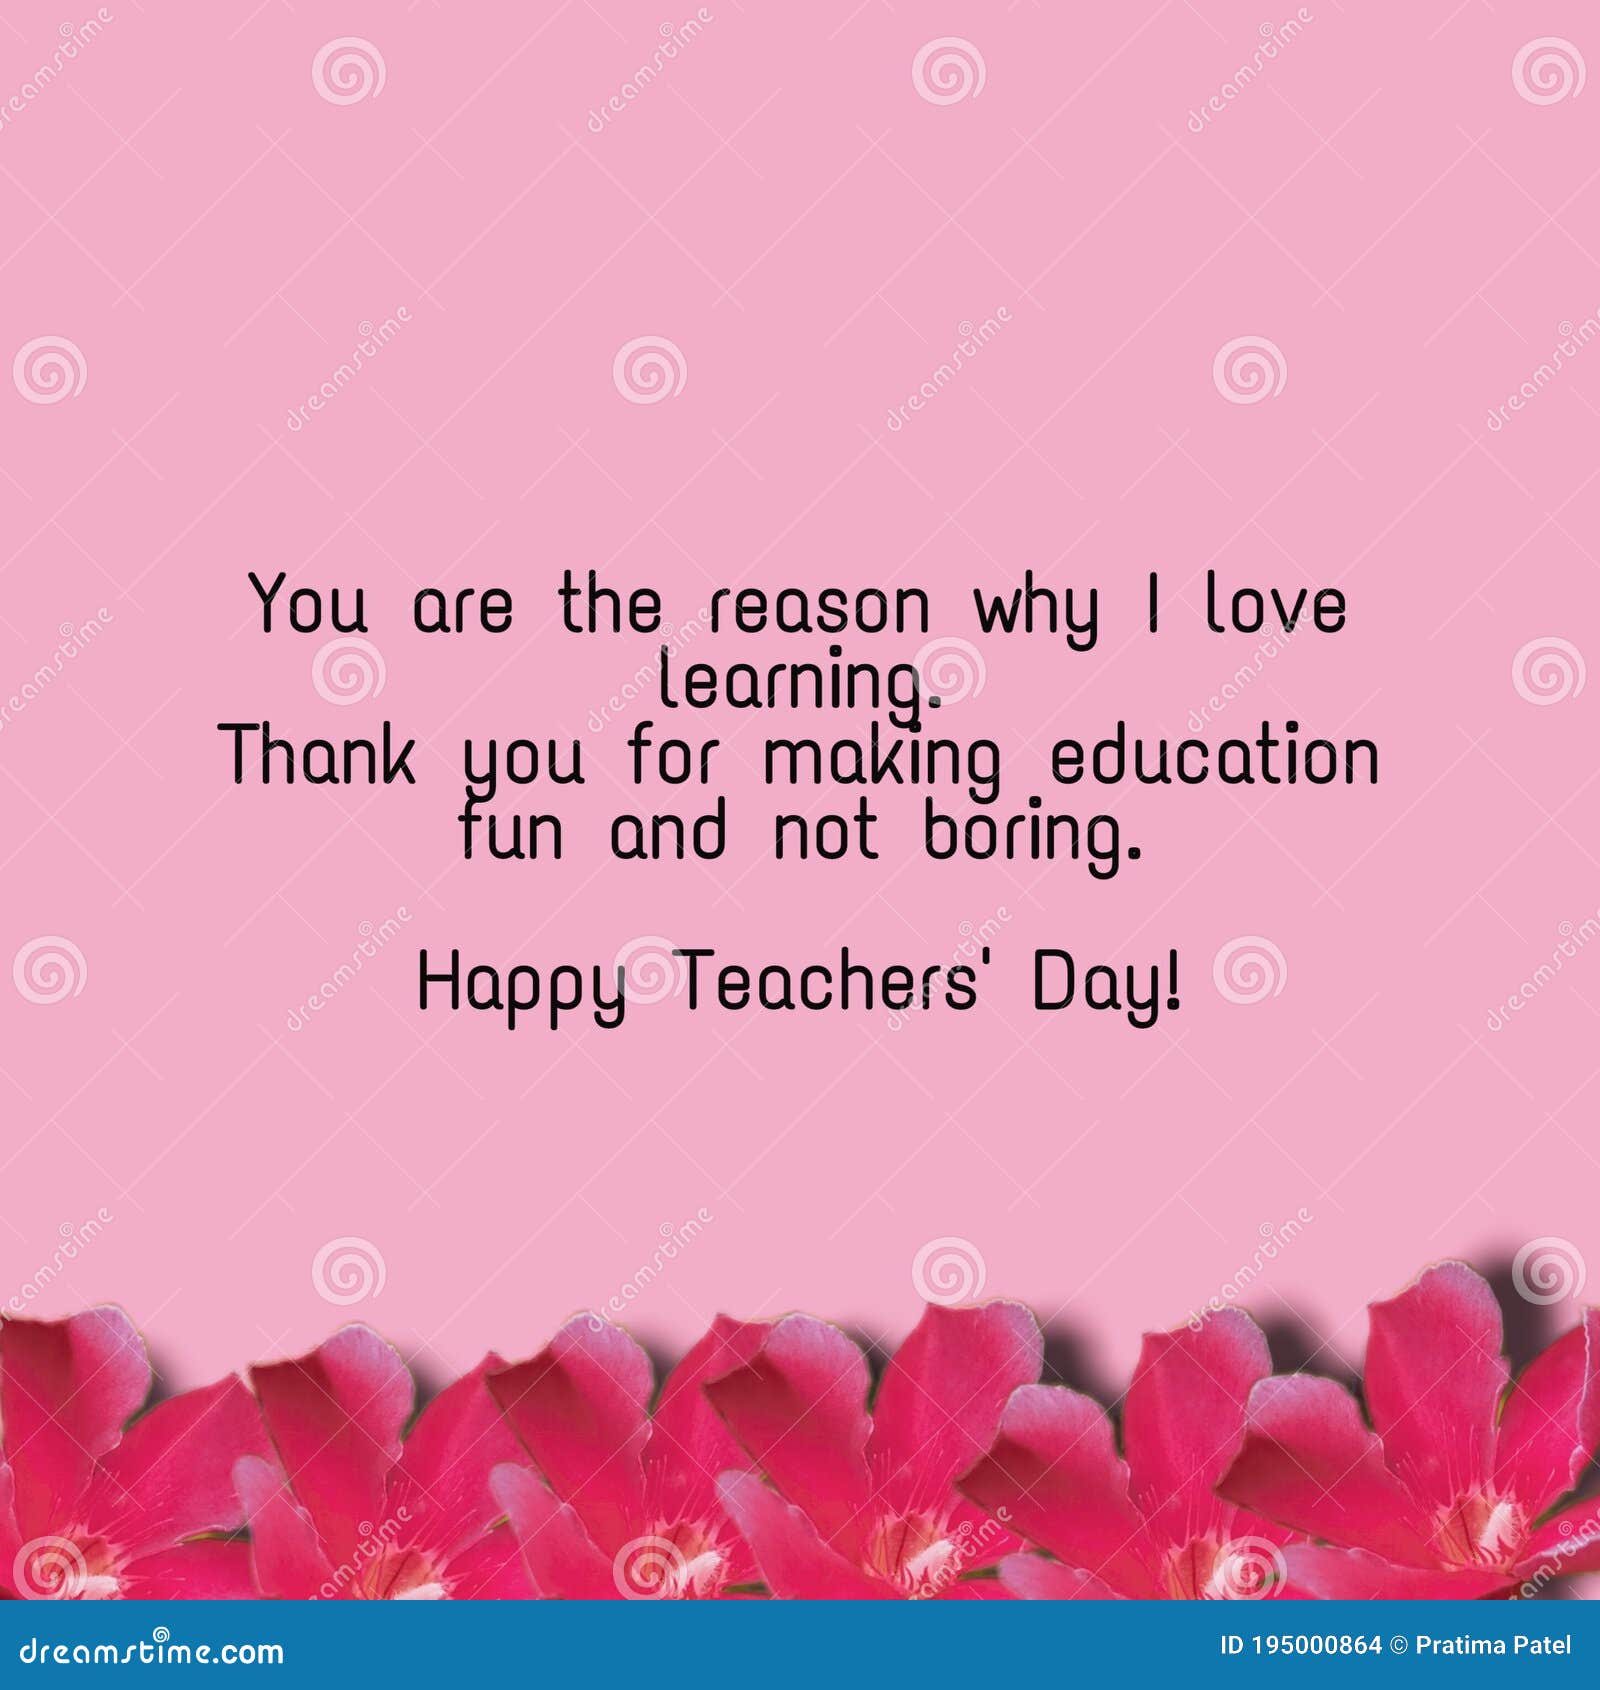 Happy Teachers Day Wishes Greeting Card Abstract Background with Colorful  Floral Pattern, Graphic Design Illustration Wallpaper Stock Illustration -  Illustration of petal, purple: 195000864